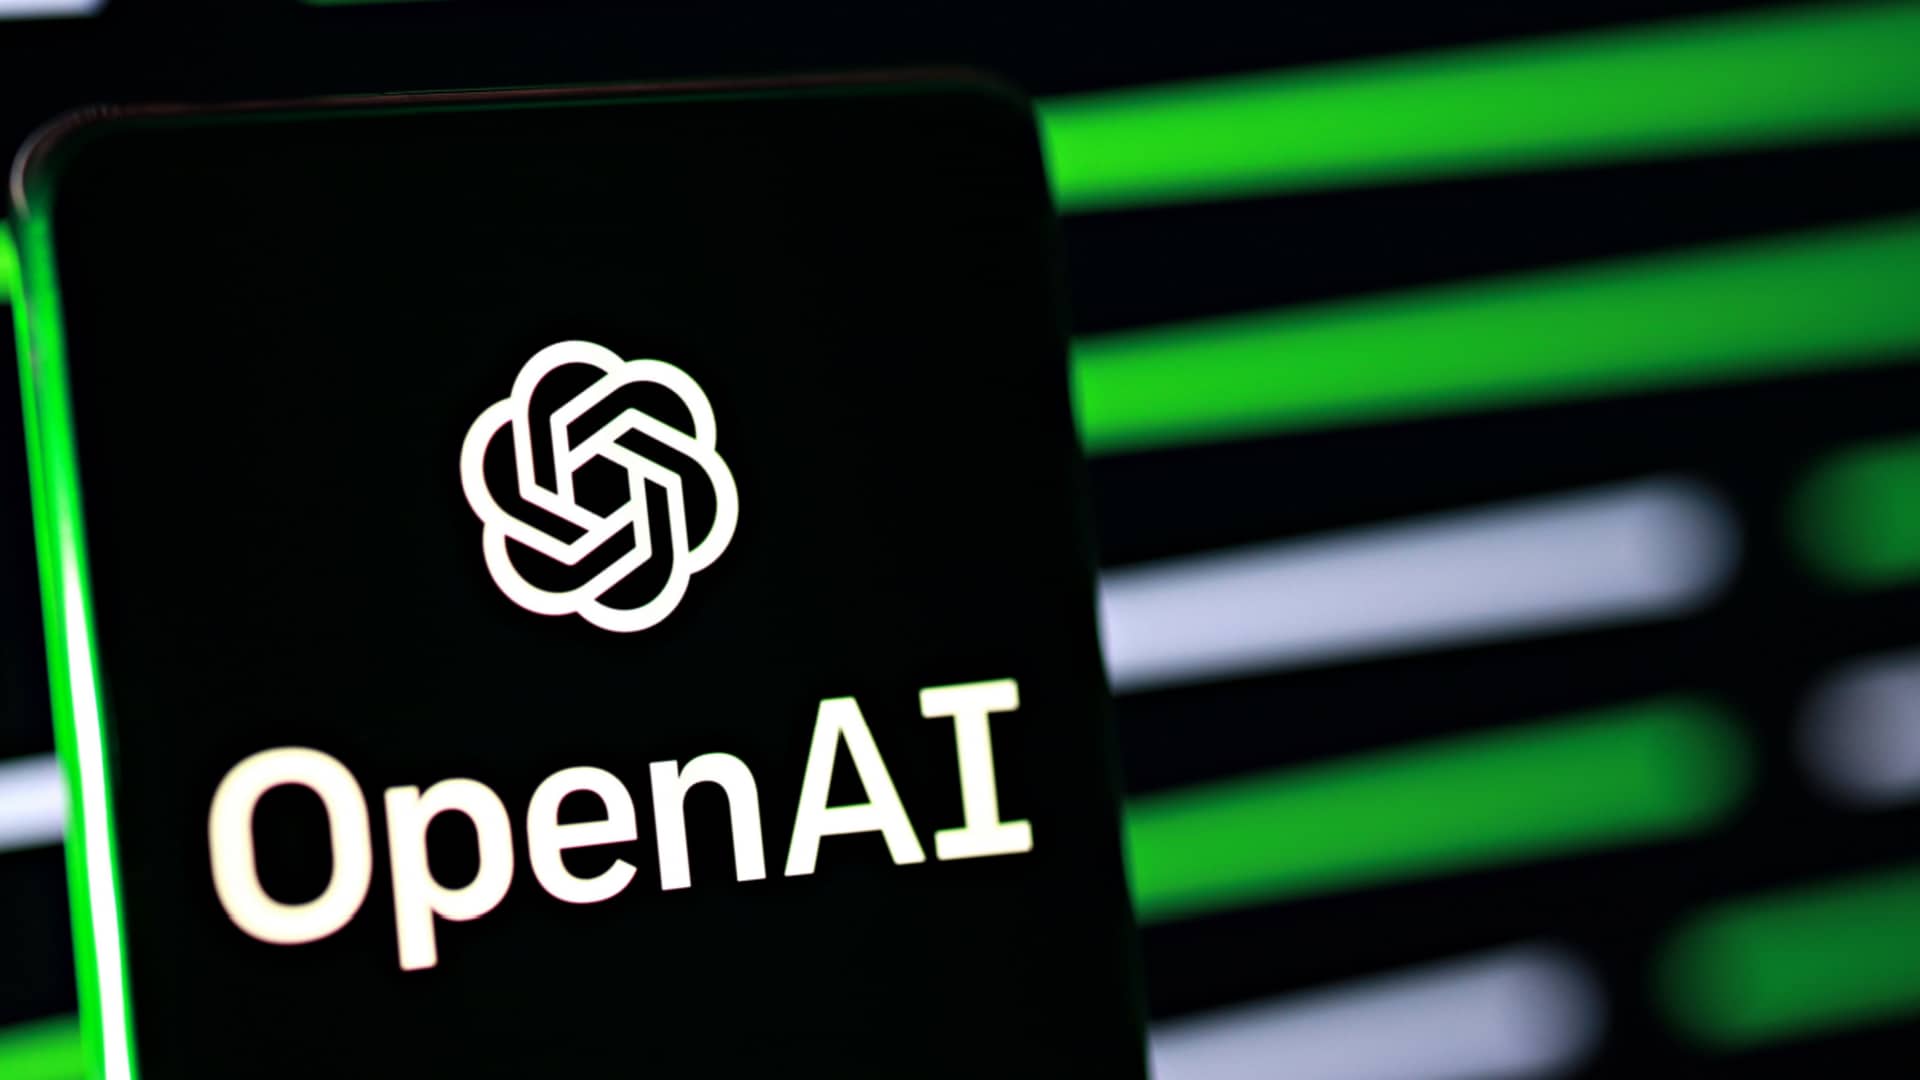 OpenAI developing AI image detection tool with claimed 99% accuracy